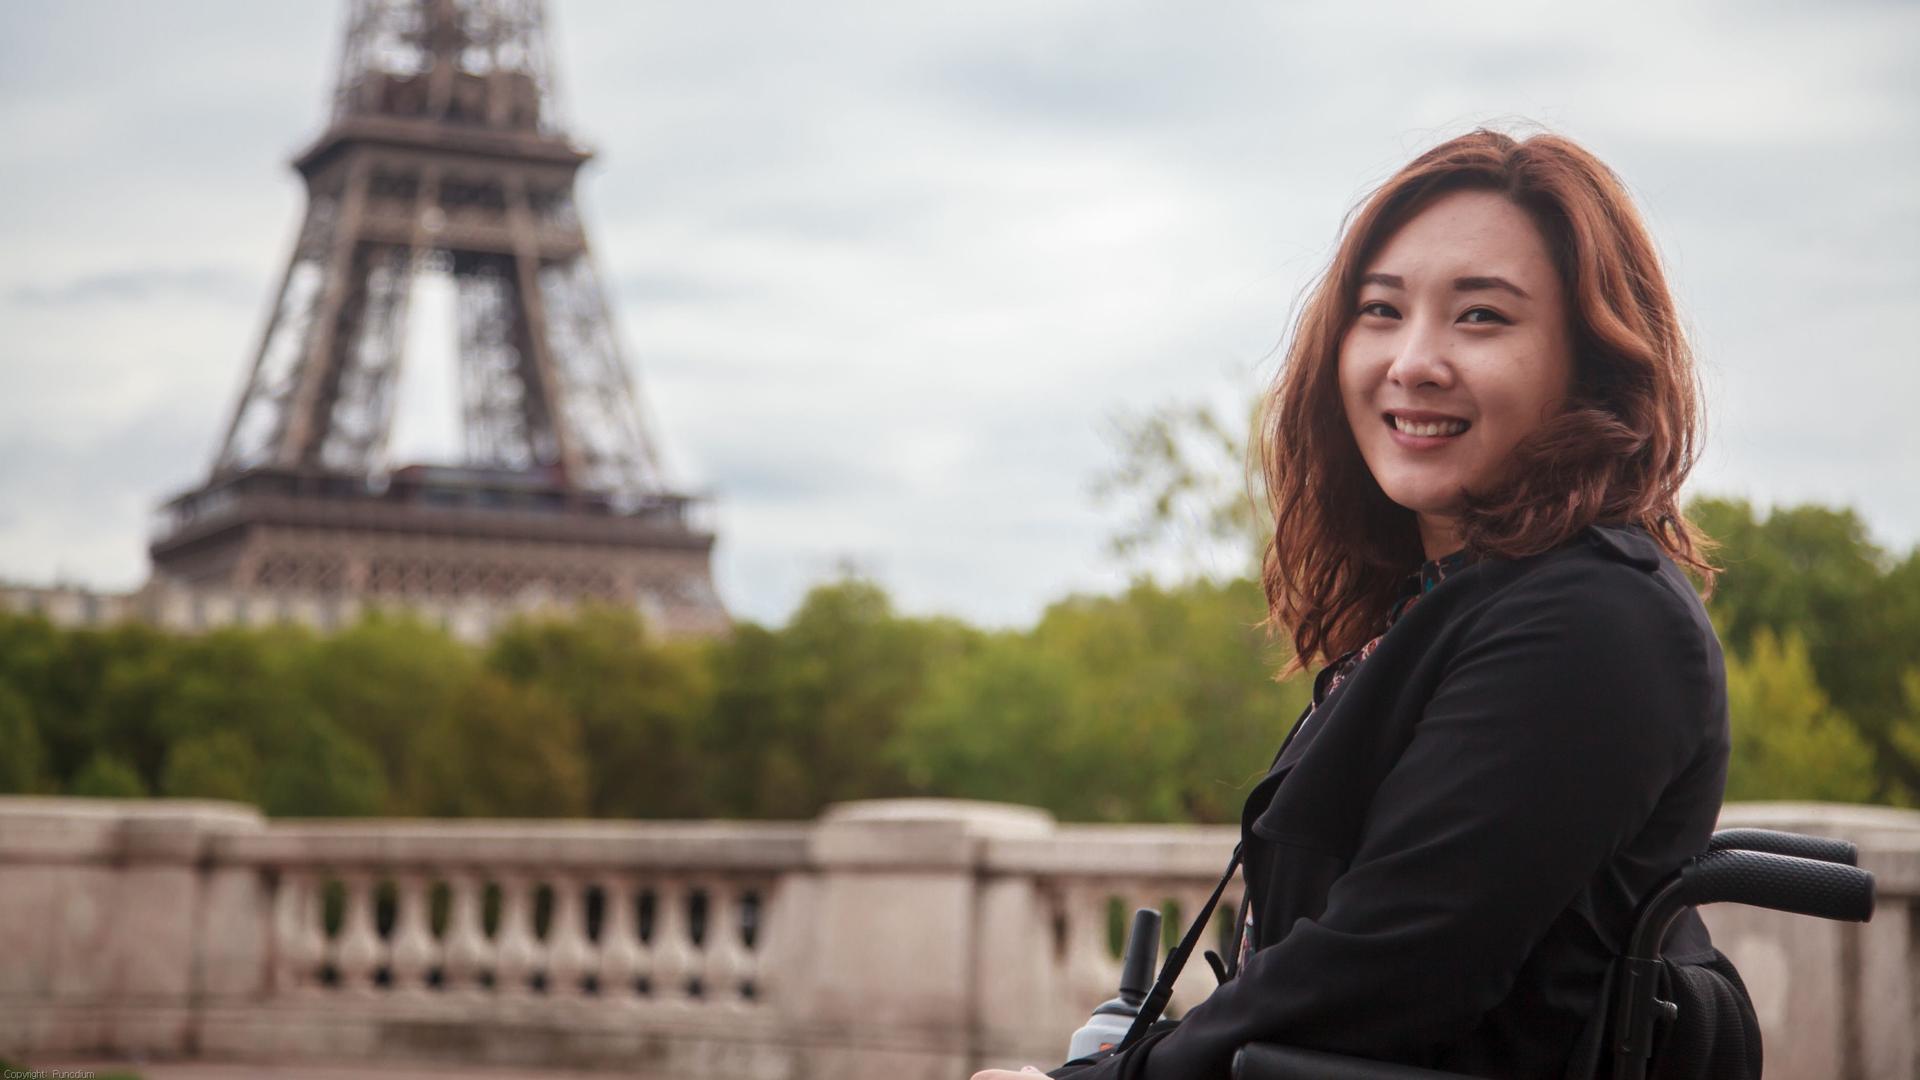 Hong Seo-yoon says travel is a great way to bring down barriers between people with disabilities and the nondisabled.